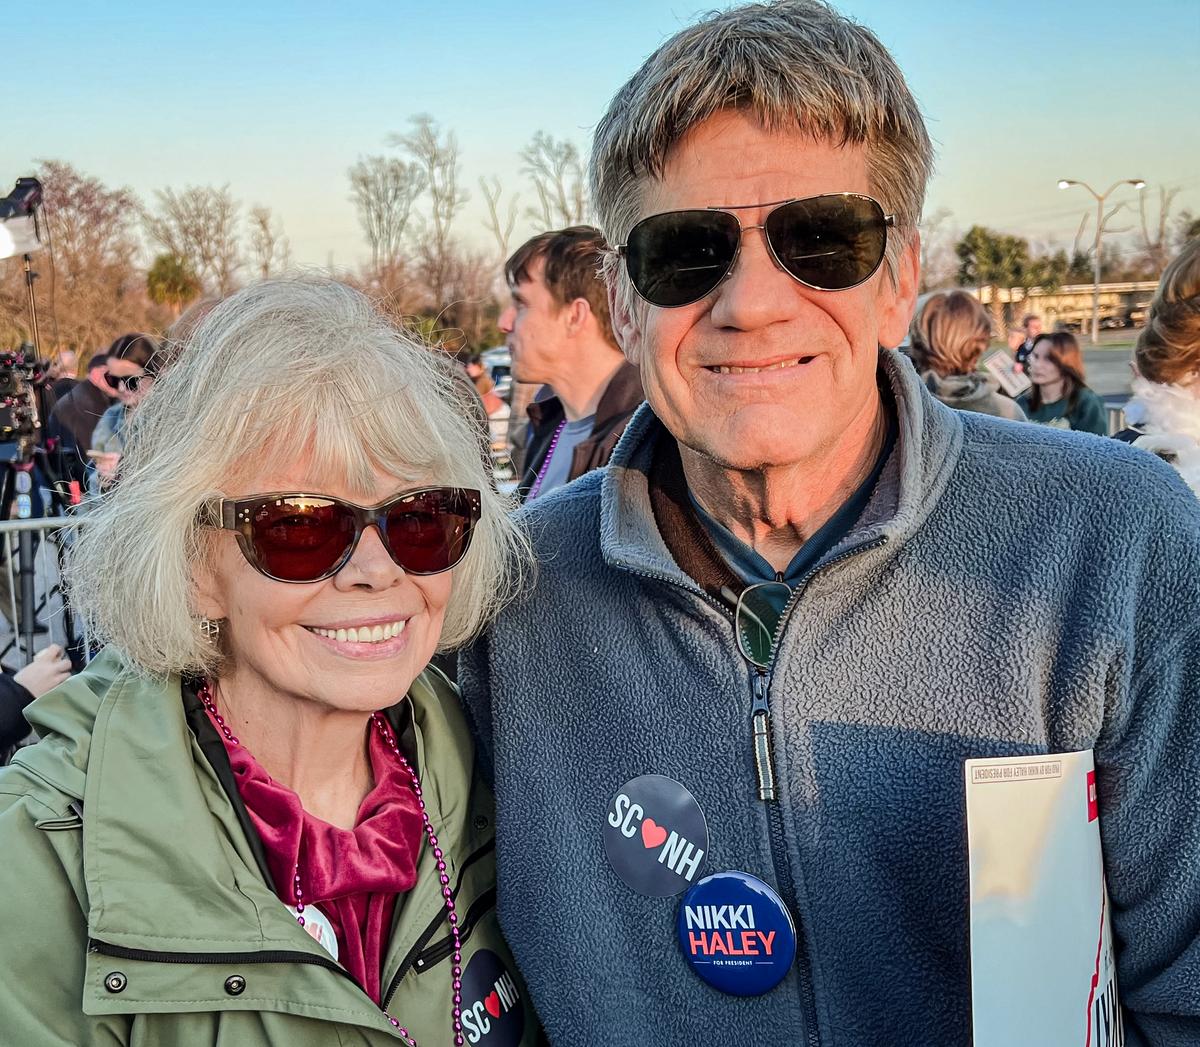 Kurt Kehlenbeck and Diane Derusha at a Haley campaign event in Mount Pleasant, S.C., on Feb. 23, 2024. (Lawrence Wilson/The Epoch Times)